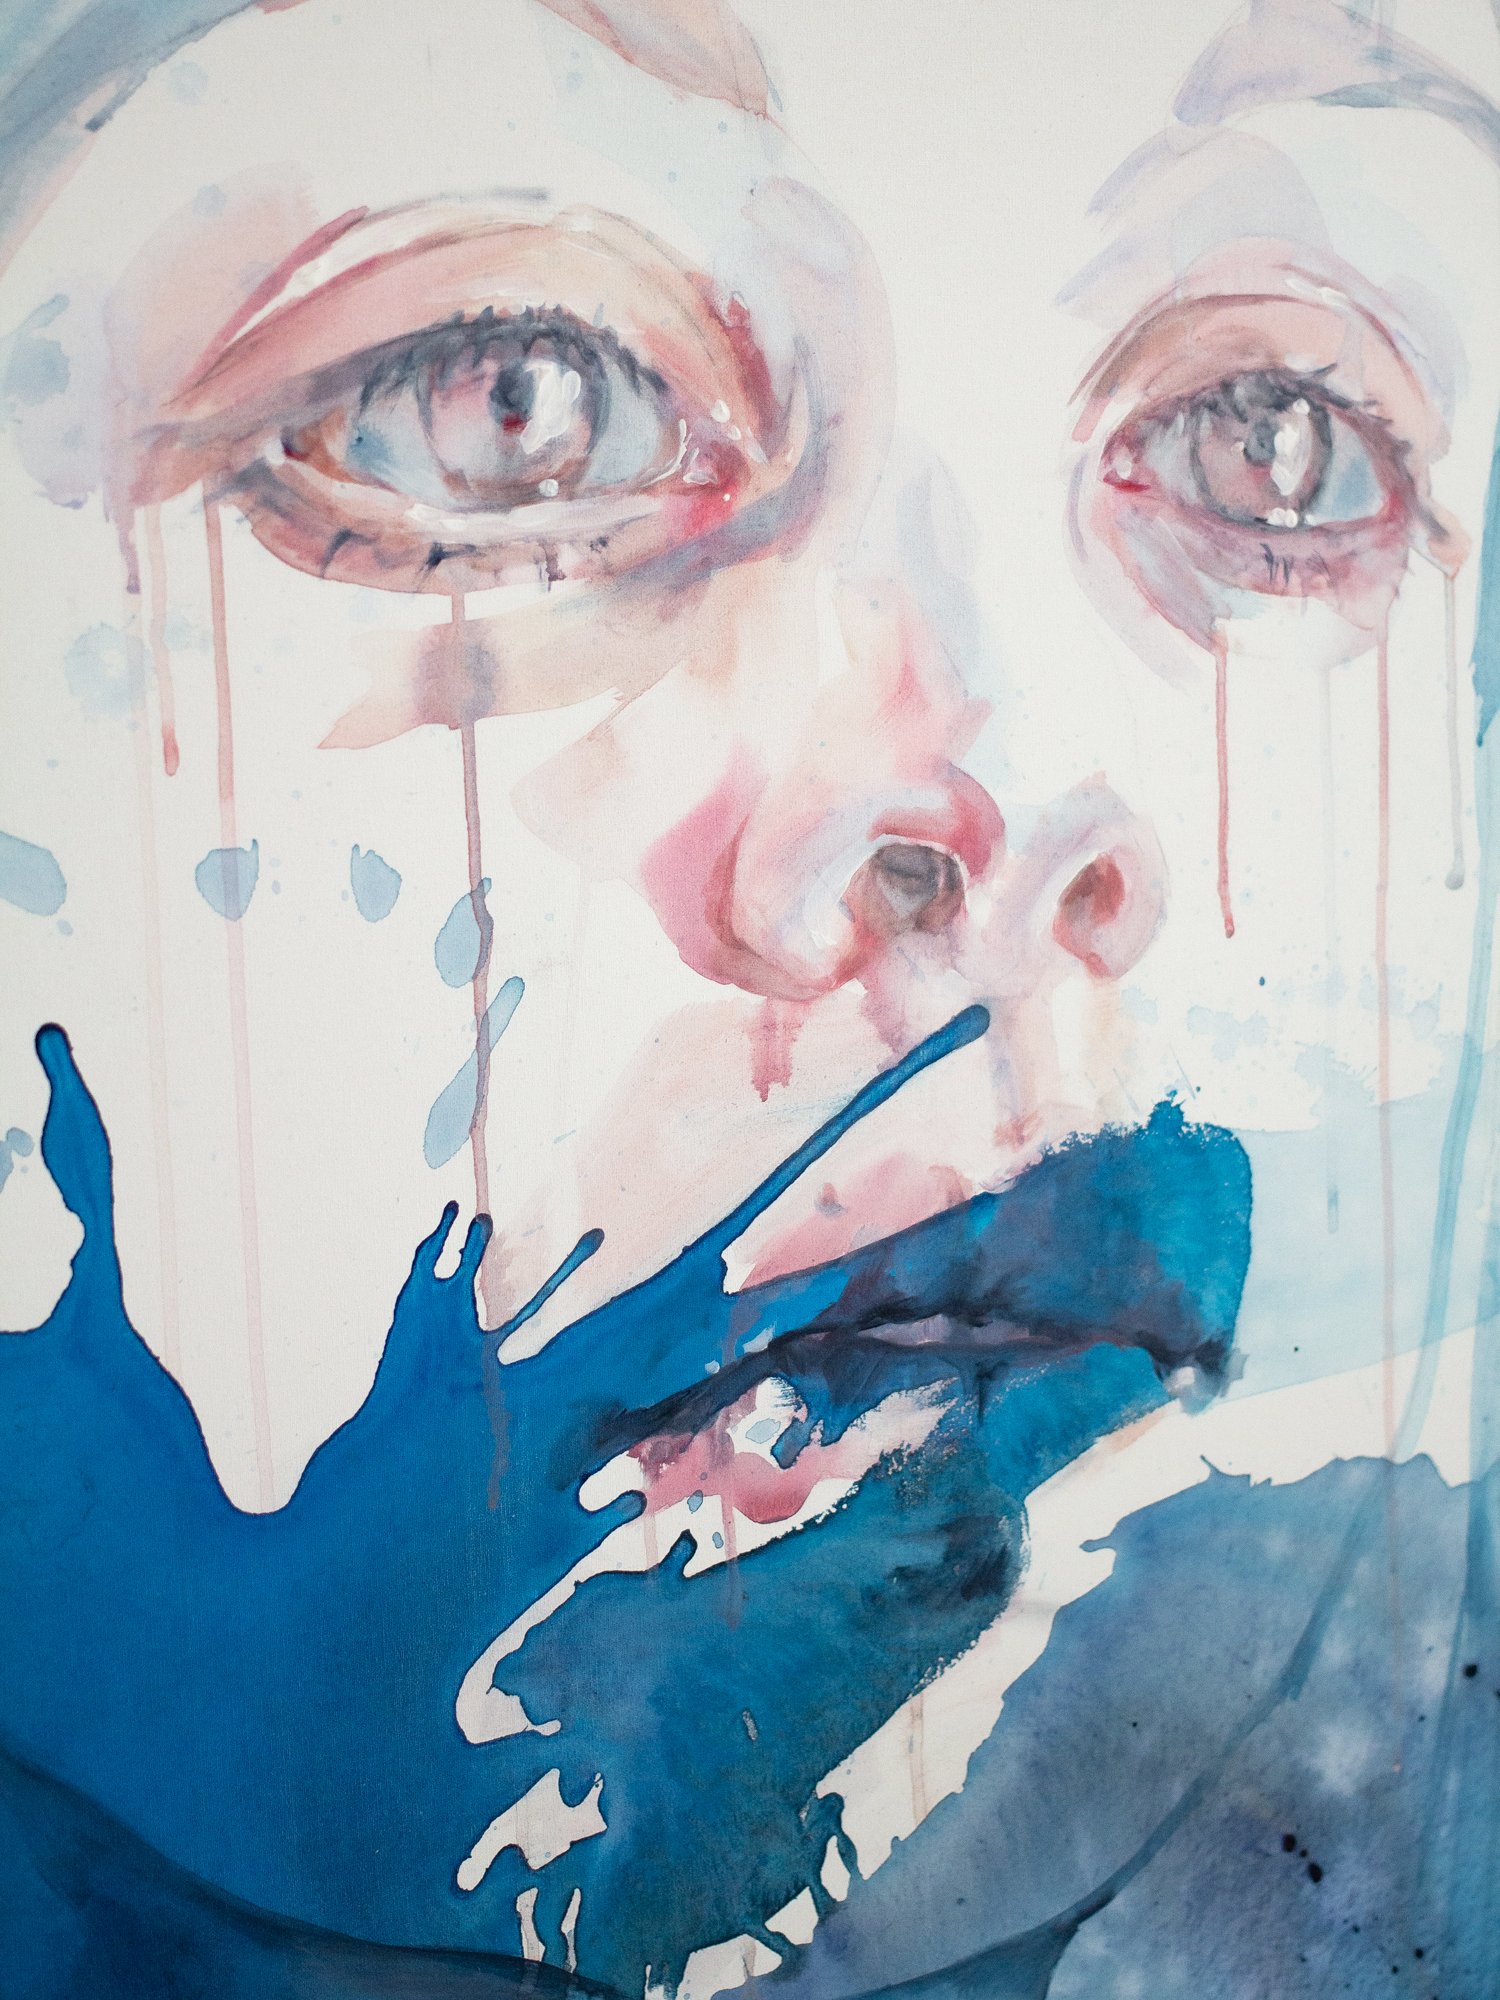 Agnes-Cecile wave upon wave, the sea brought me here (100x150 cm)